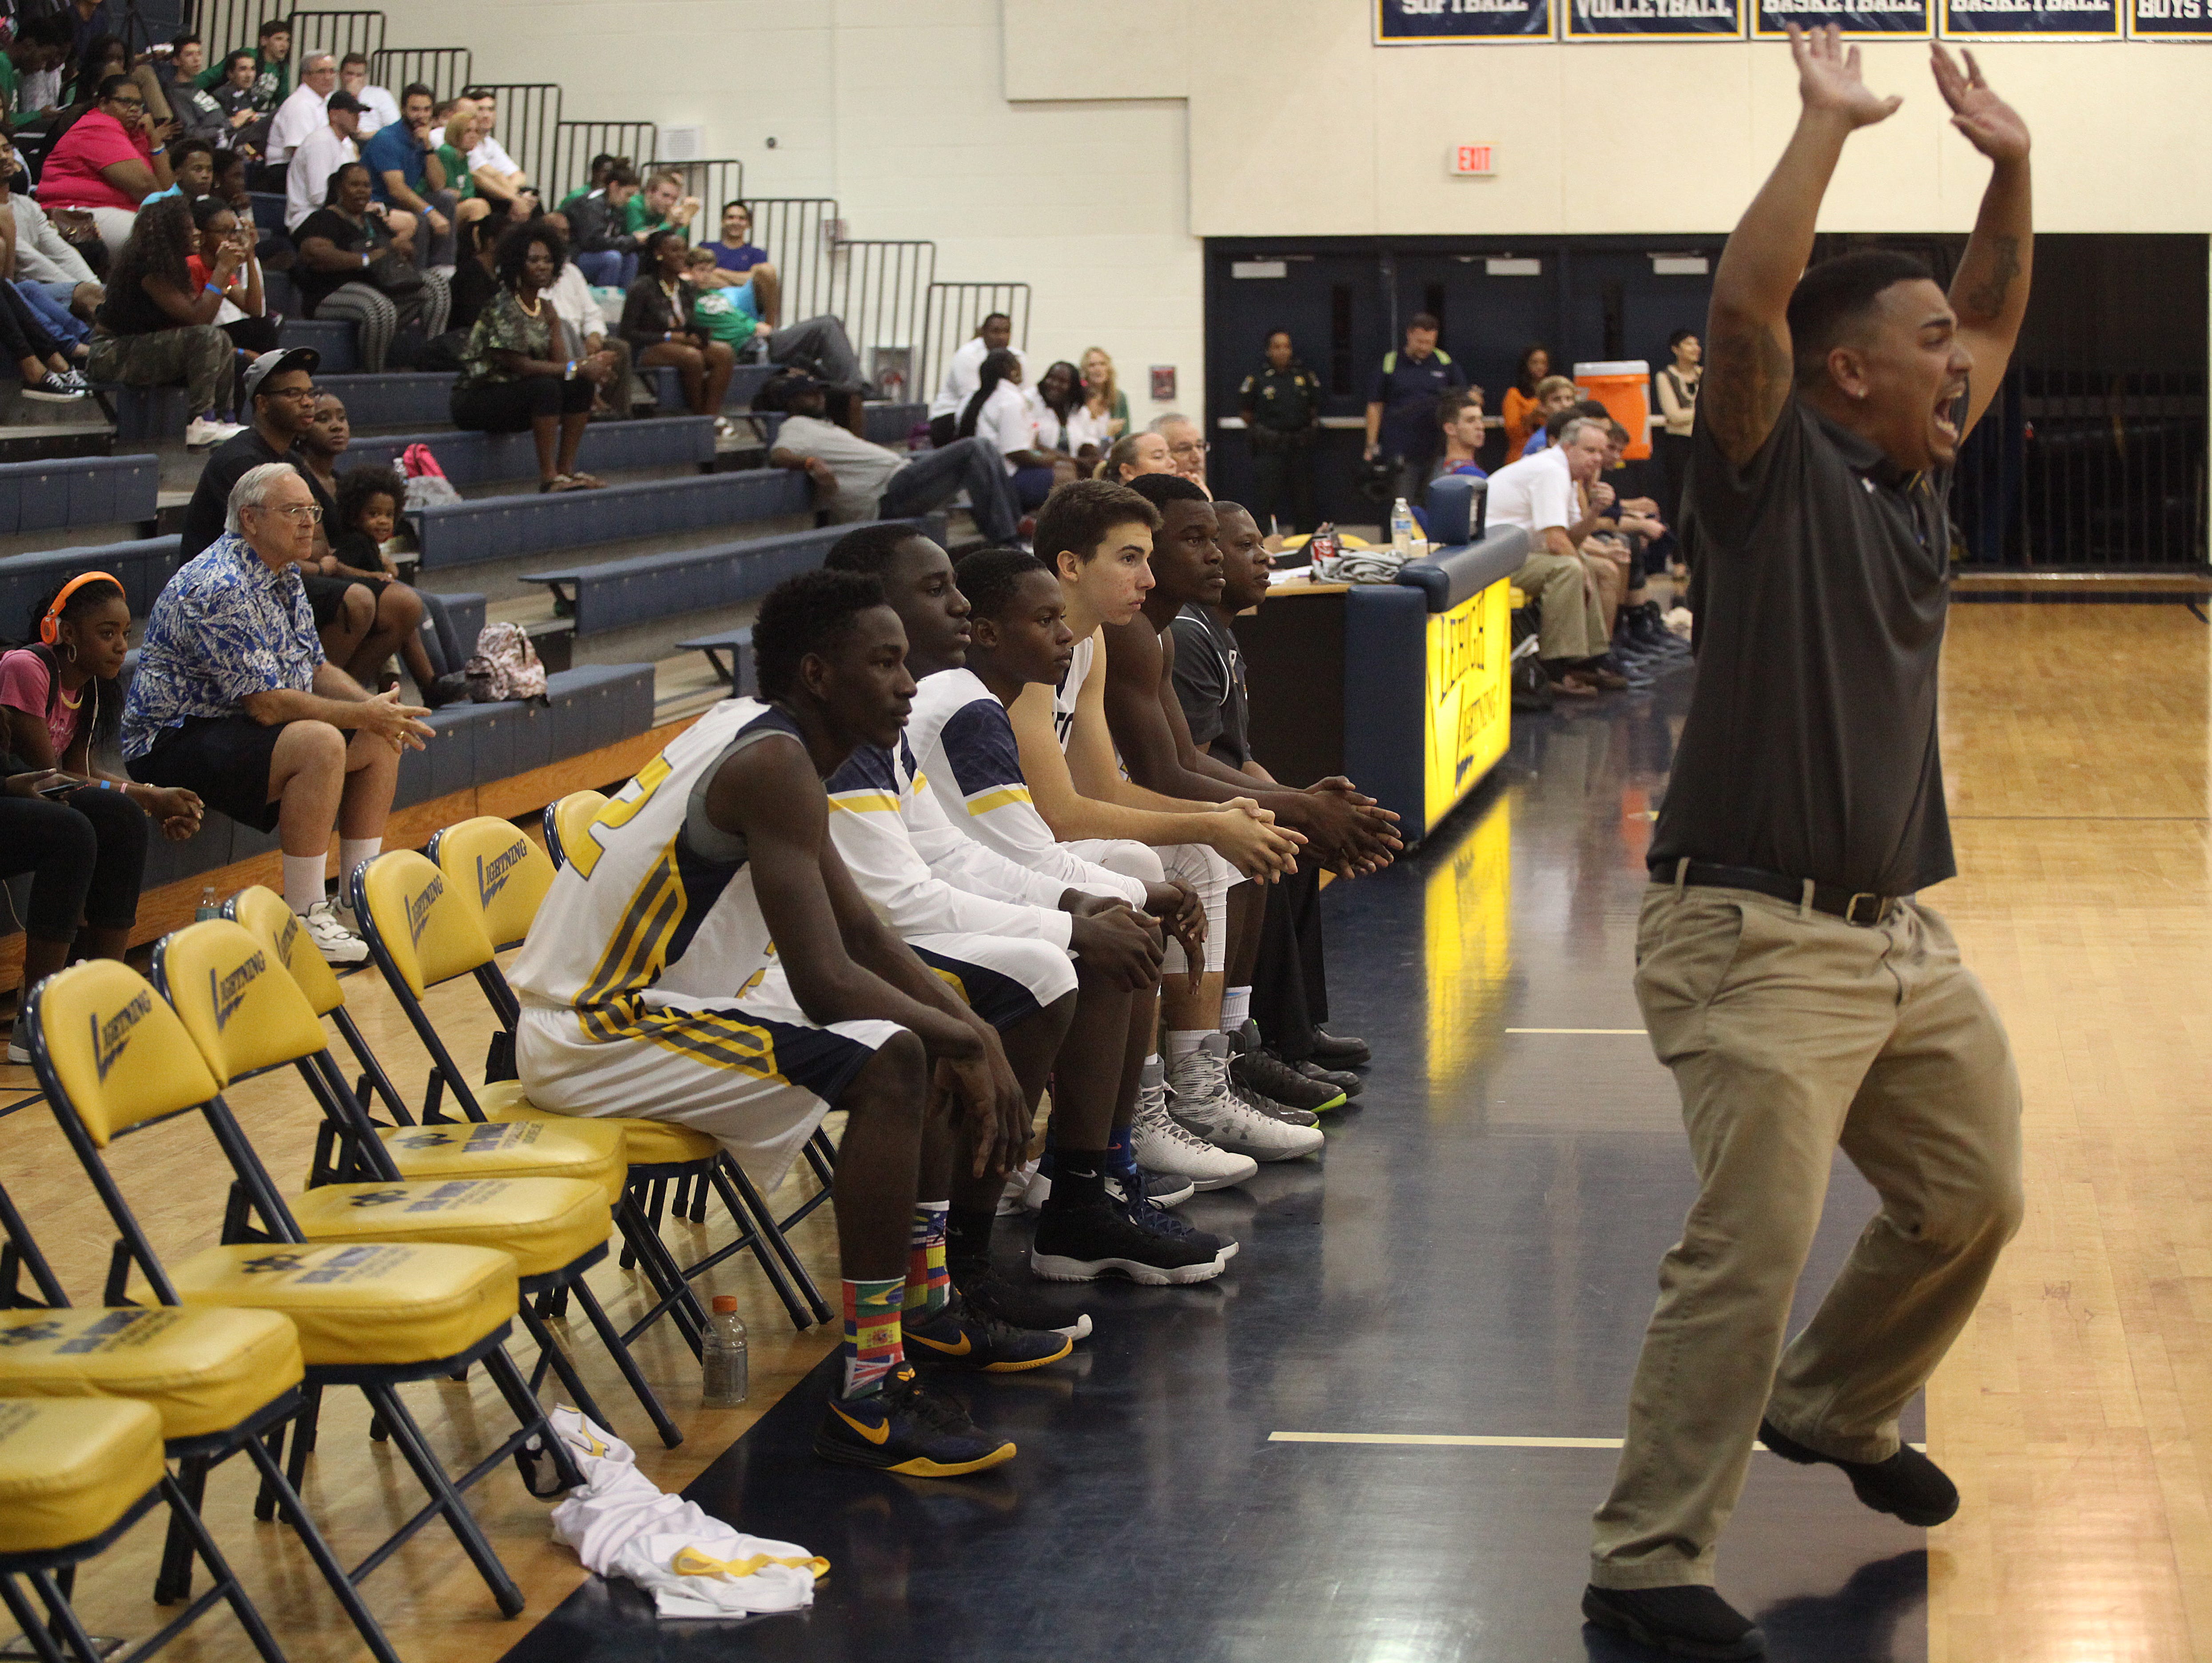 Lehigh basketball coach Mike Bonilla communicates with his team from the sidelines during a game against Estero on Wednesday. Bonilla was filling in for coach Dawn McNew who was suspended. Empty seats on Lehigh’s bench are the result of the suspension of several players.